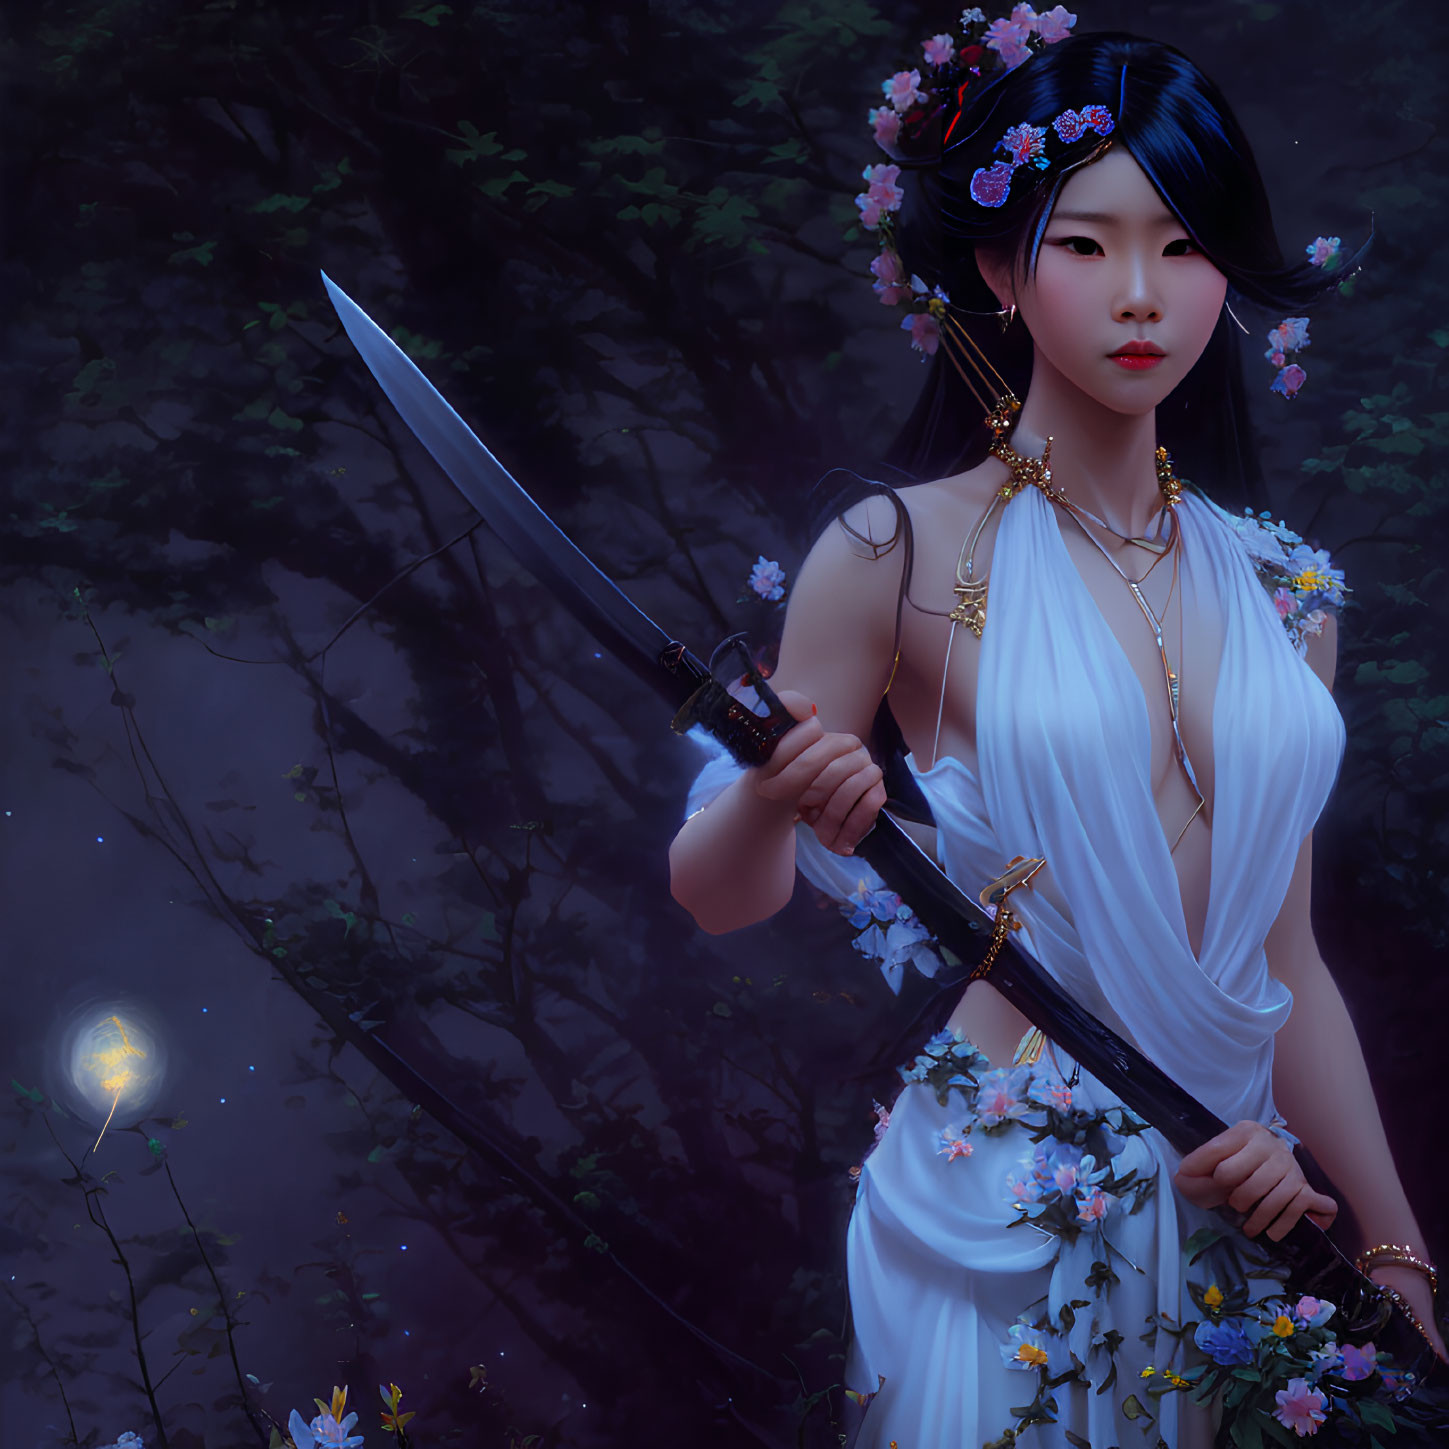 Woman in white dress with floral sword in mystical forest with glowing orb